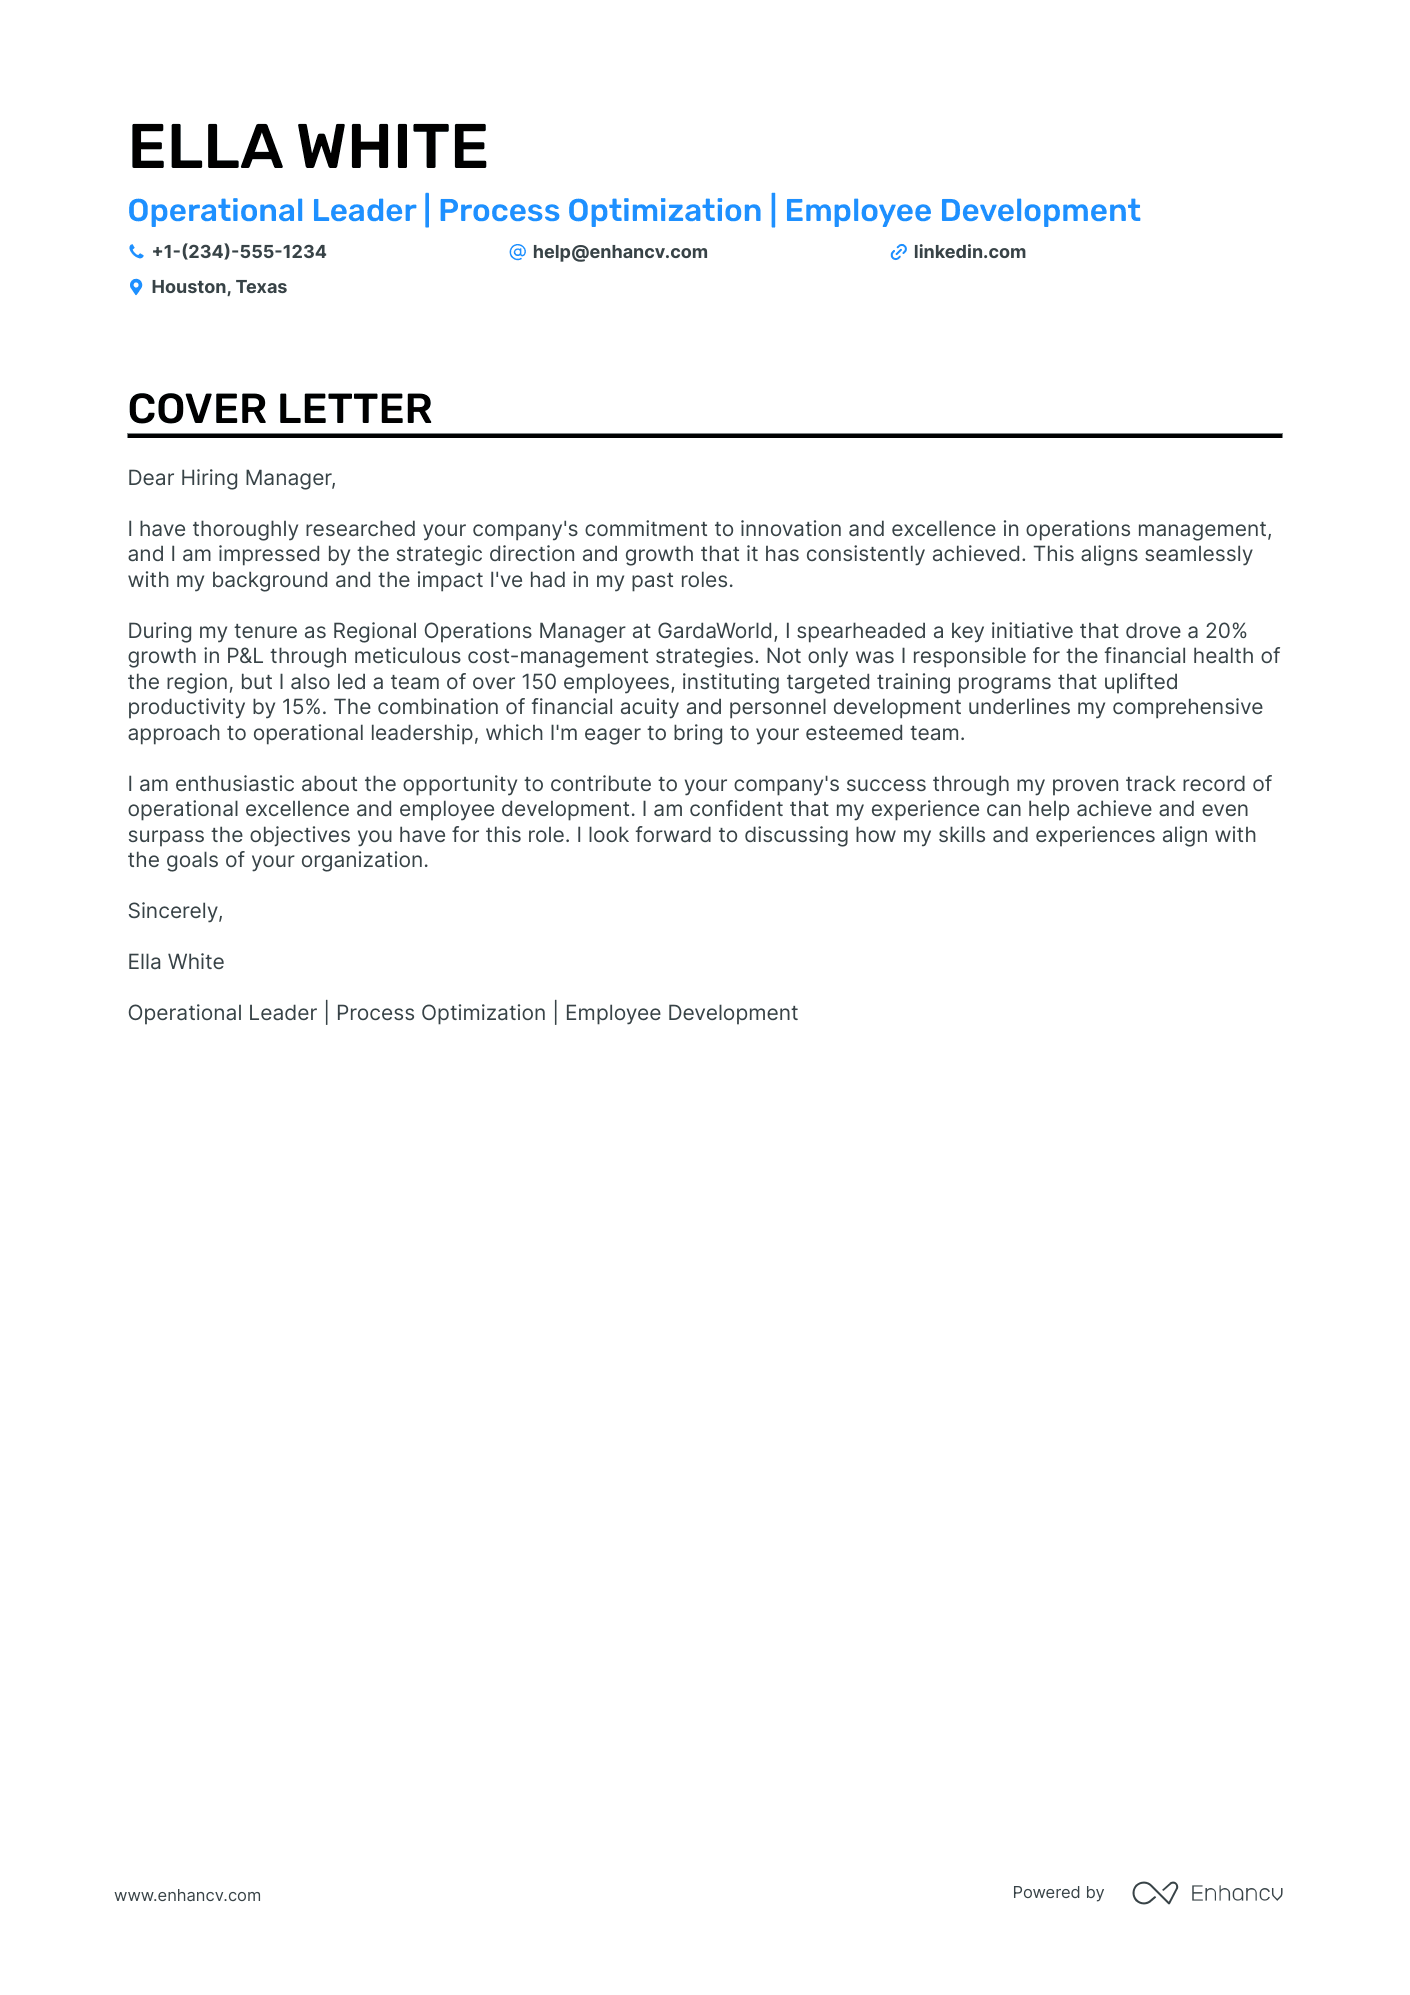 Branch Manager cover letter